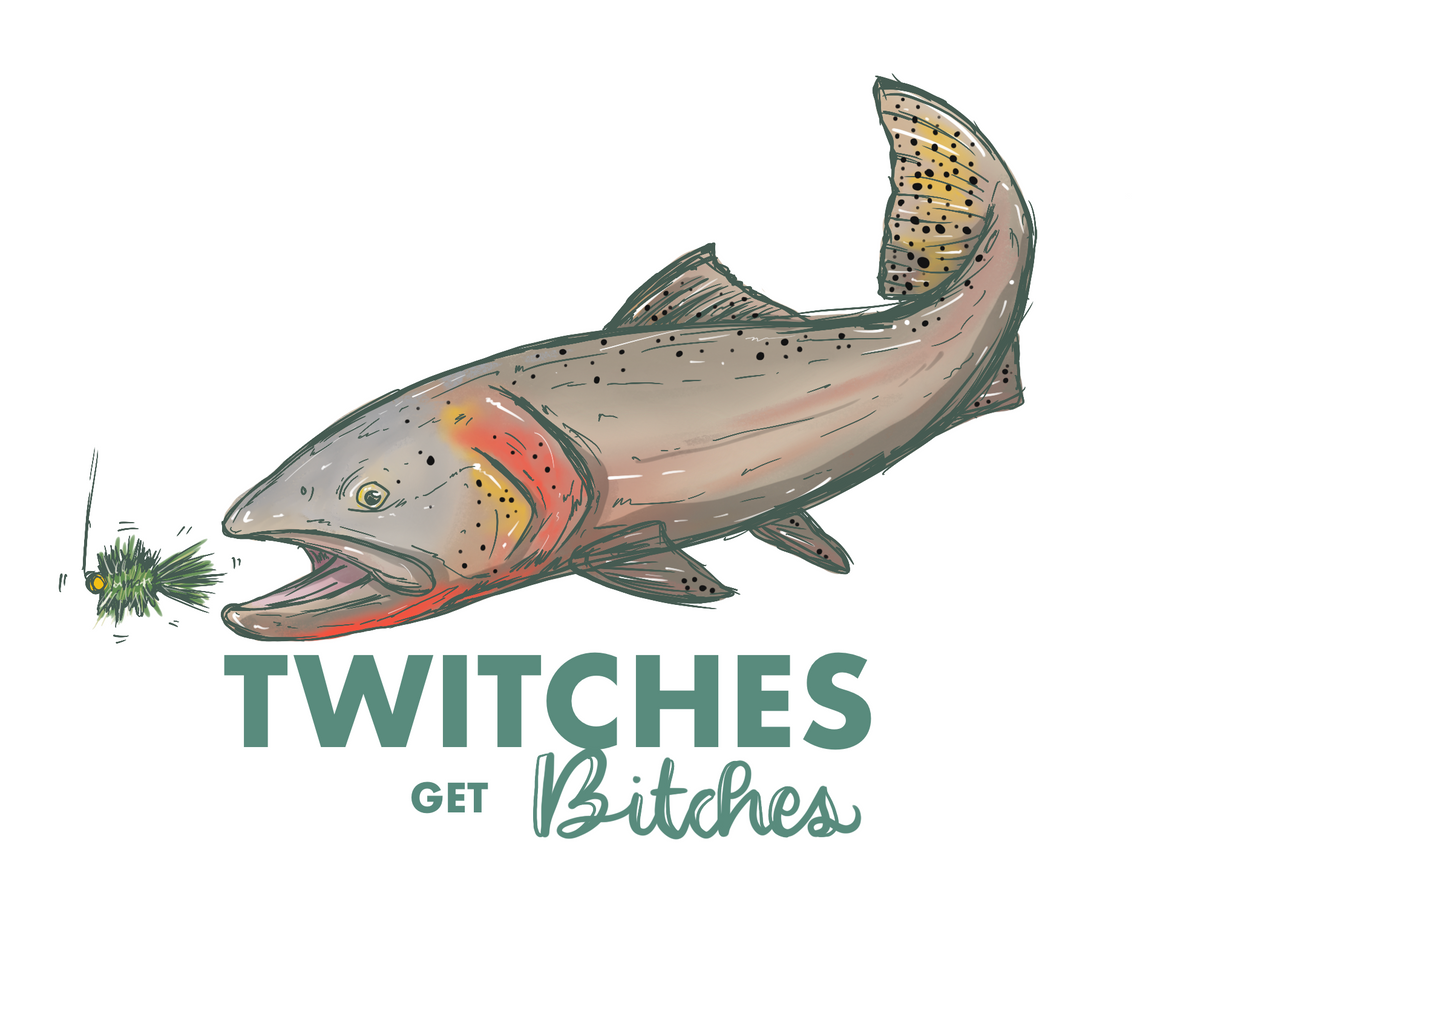 Twitches get Bitches Stickers